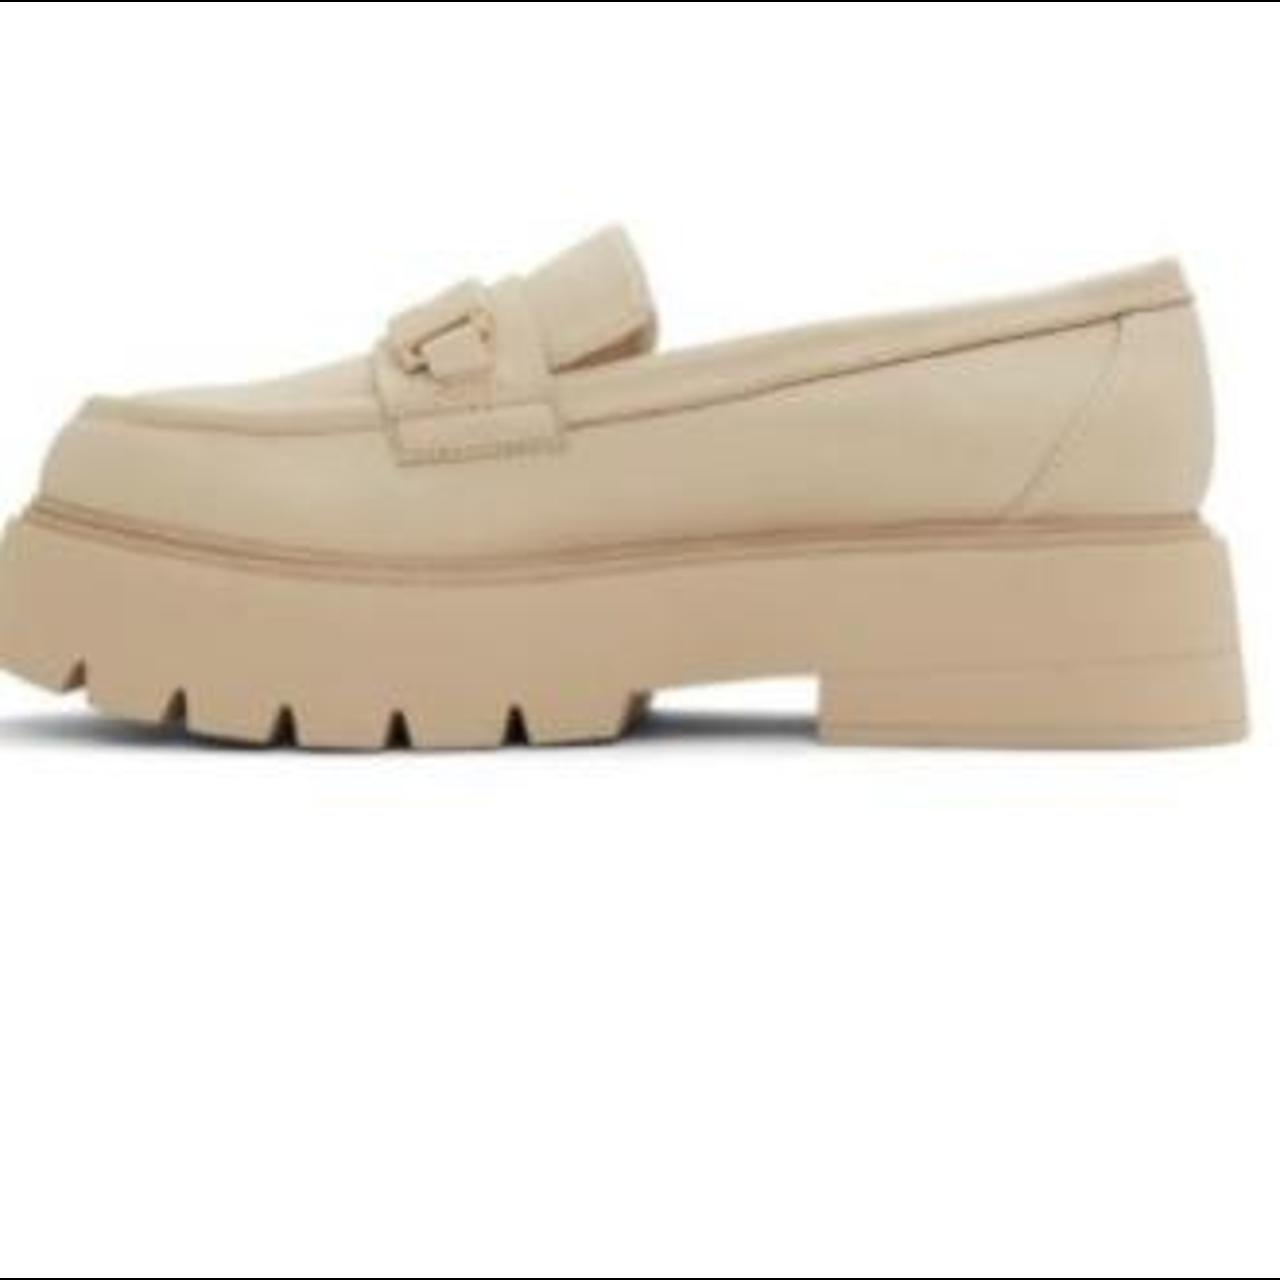 Call it Spring Women's Cream Loafers (3)